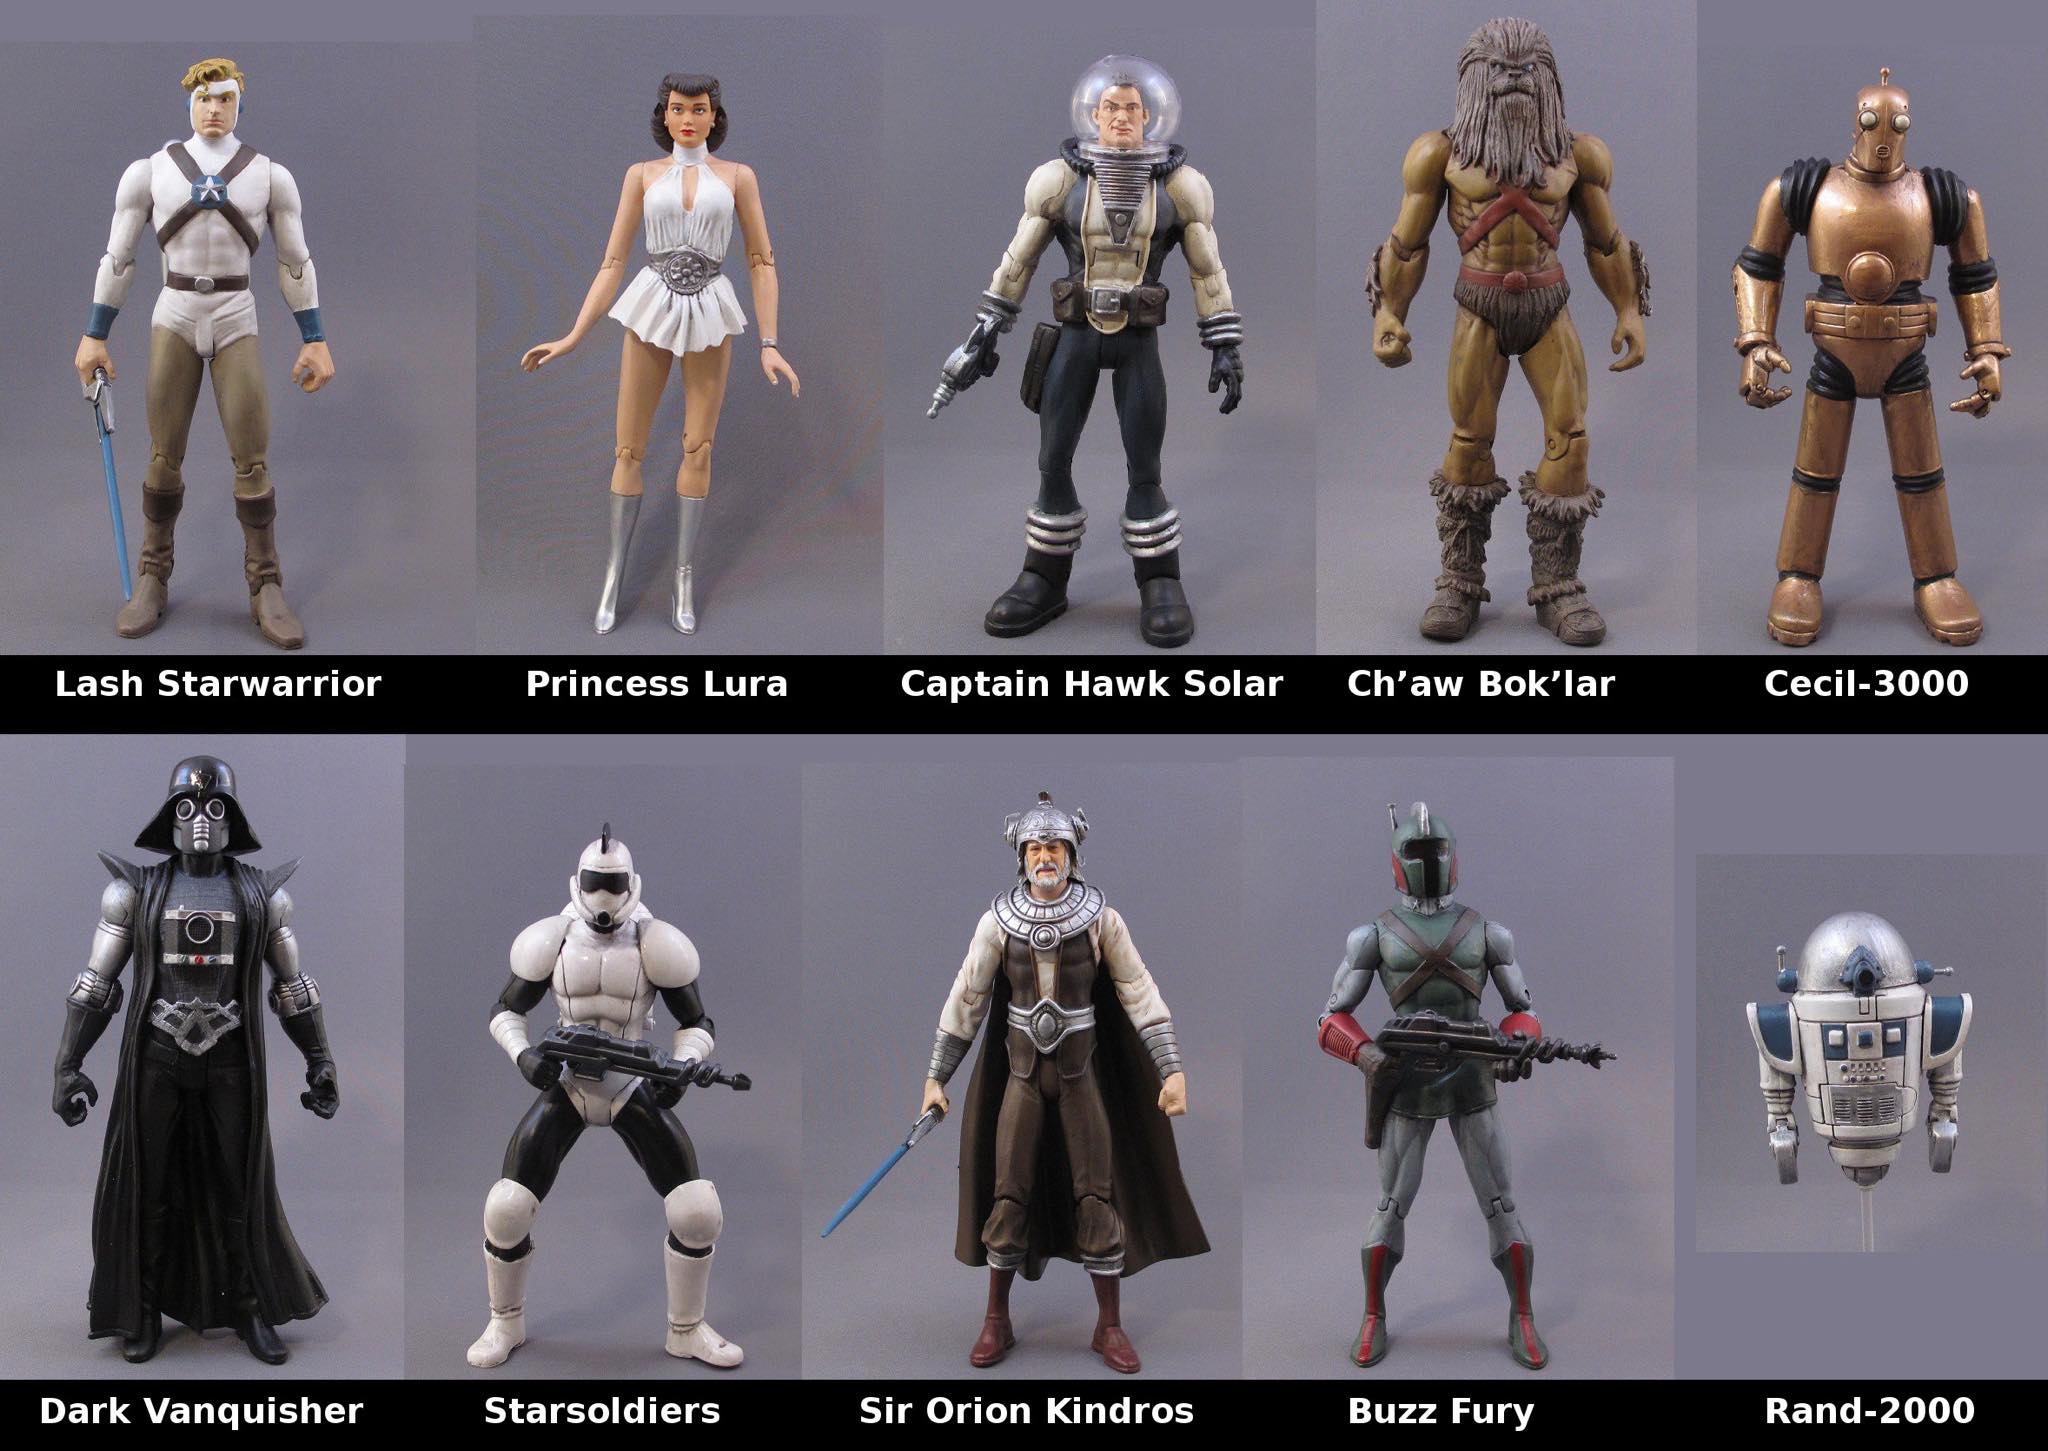 Star Wars Re-imagined In All Sort Of Settings As Toys... Sorry, Action Figures.